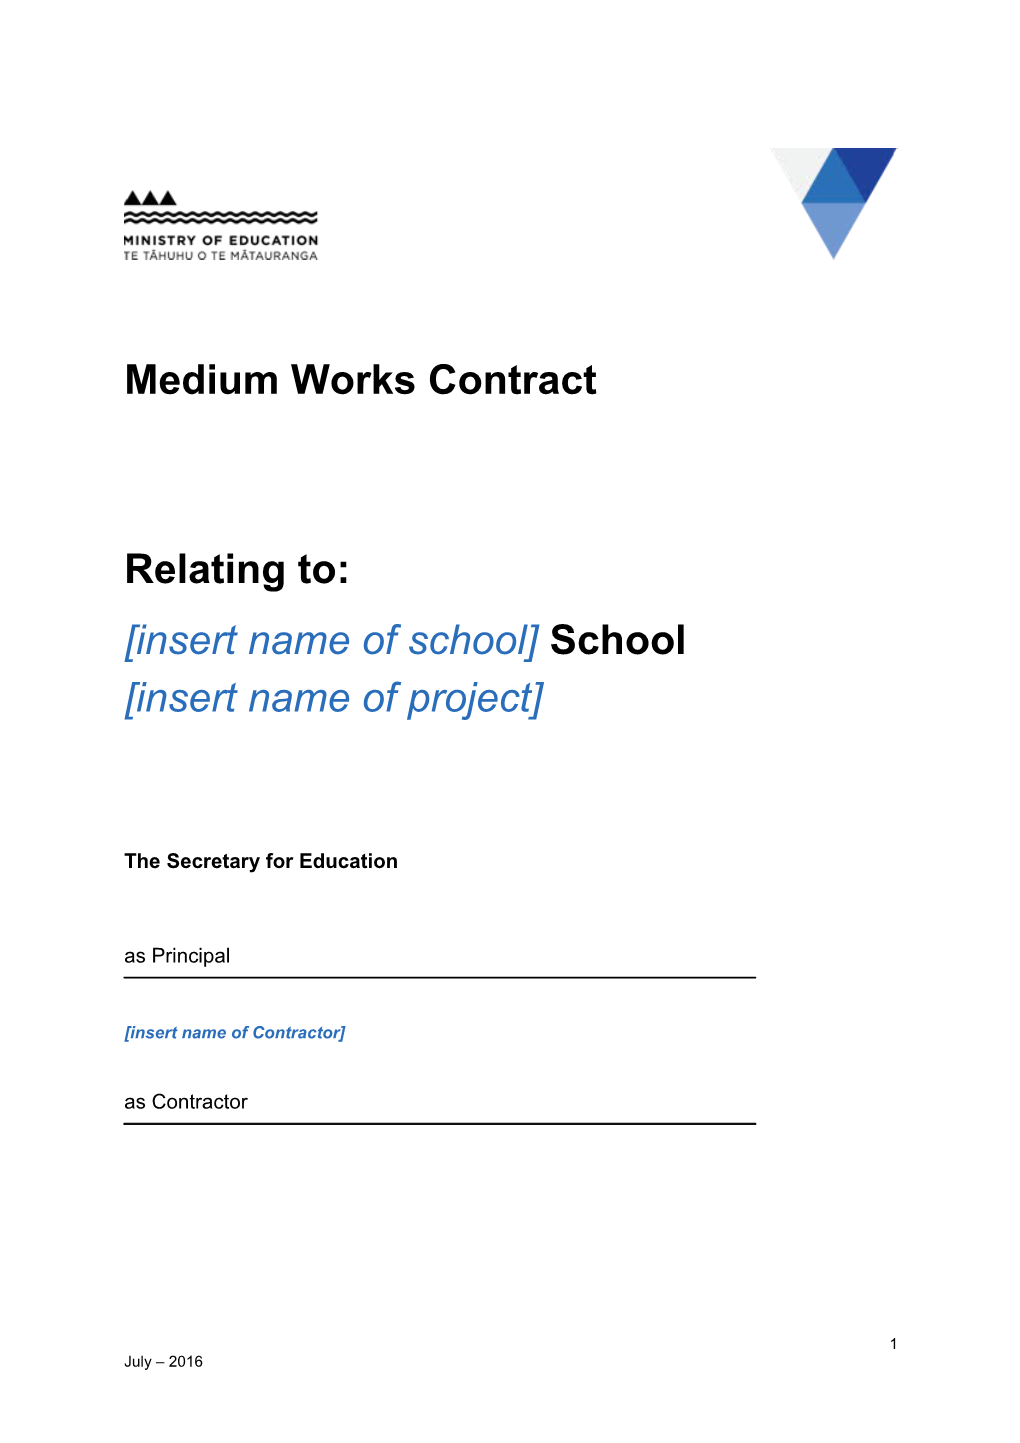 Medium Works Contract Template